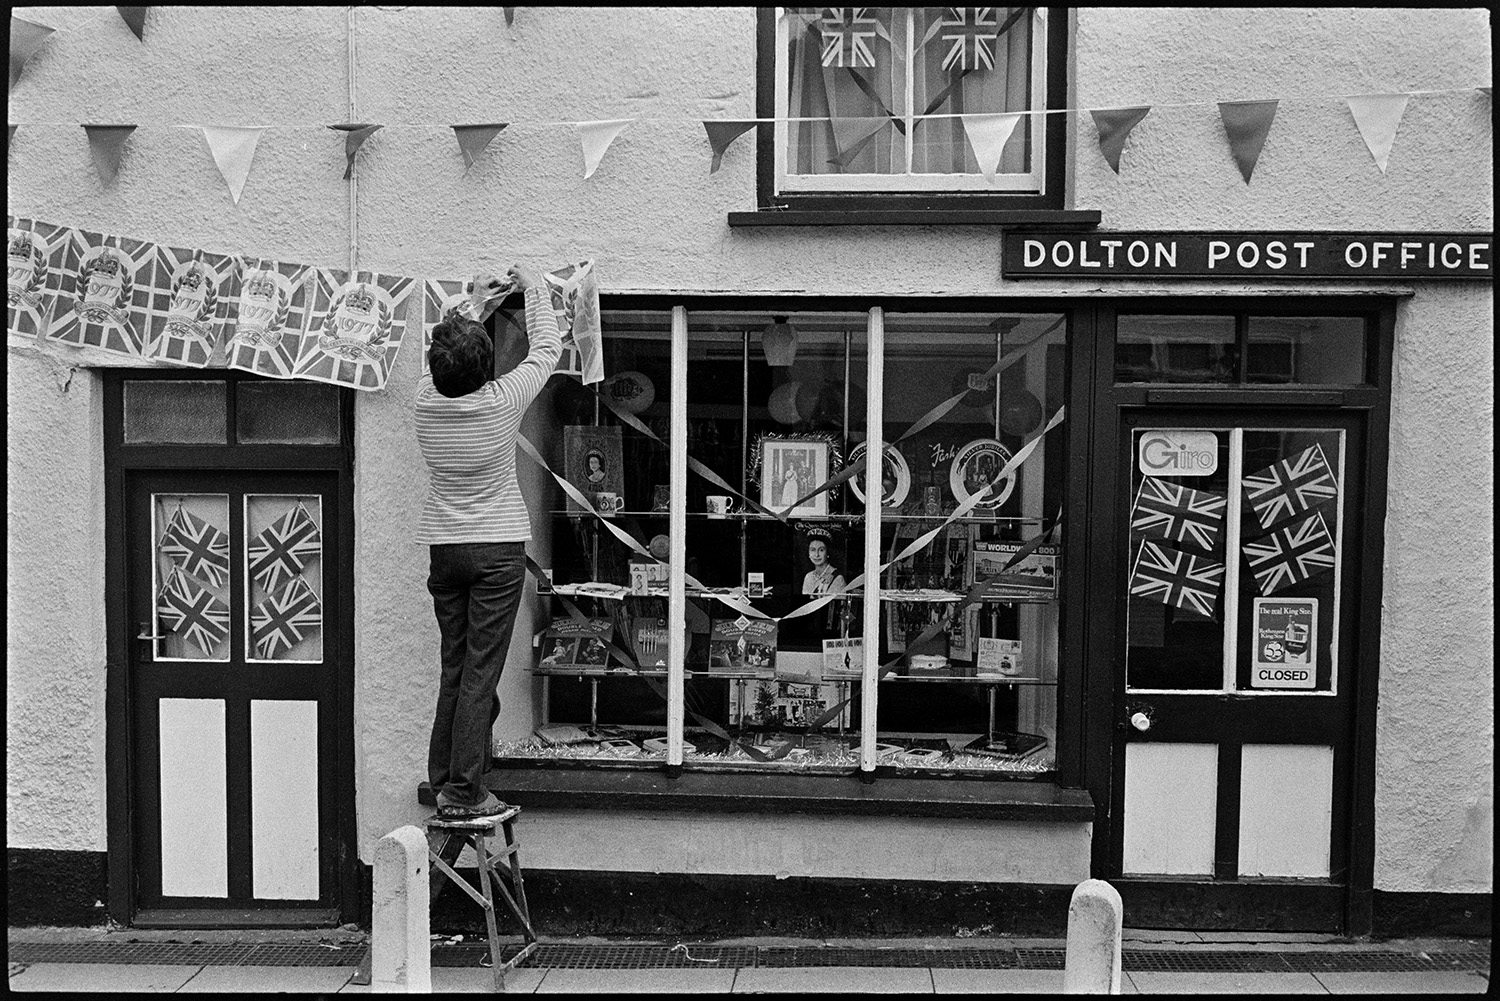 Woman decorating Post Office with flags on Jubilee day! 
[Pat Corbey decorating Dolton Post Office with Union Jack flags, bunting and ribbons on Queen Elizabeth II Silver Jubilee day. The shop window has various royal souvenirs and pictures of the Queen on display.]